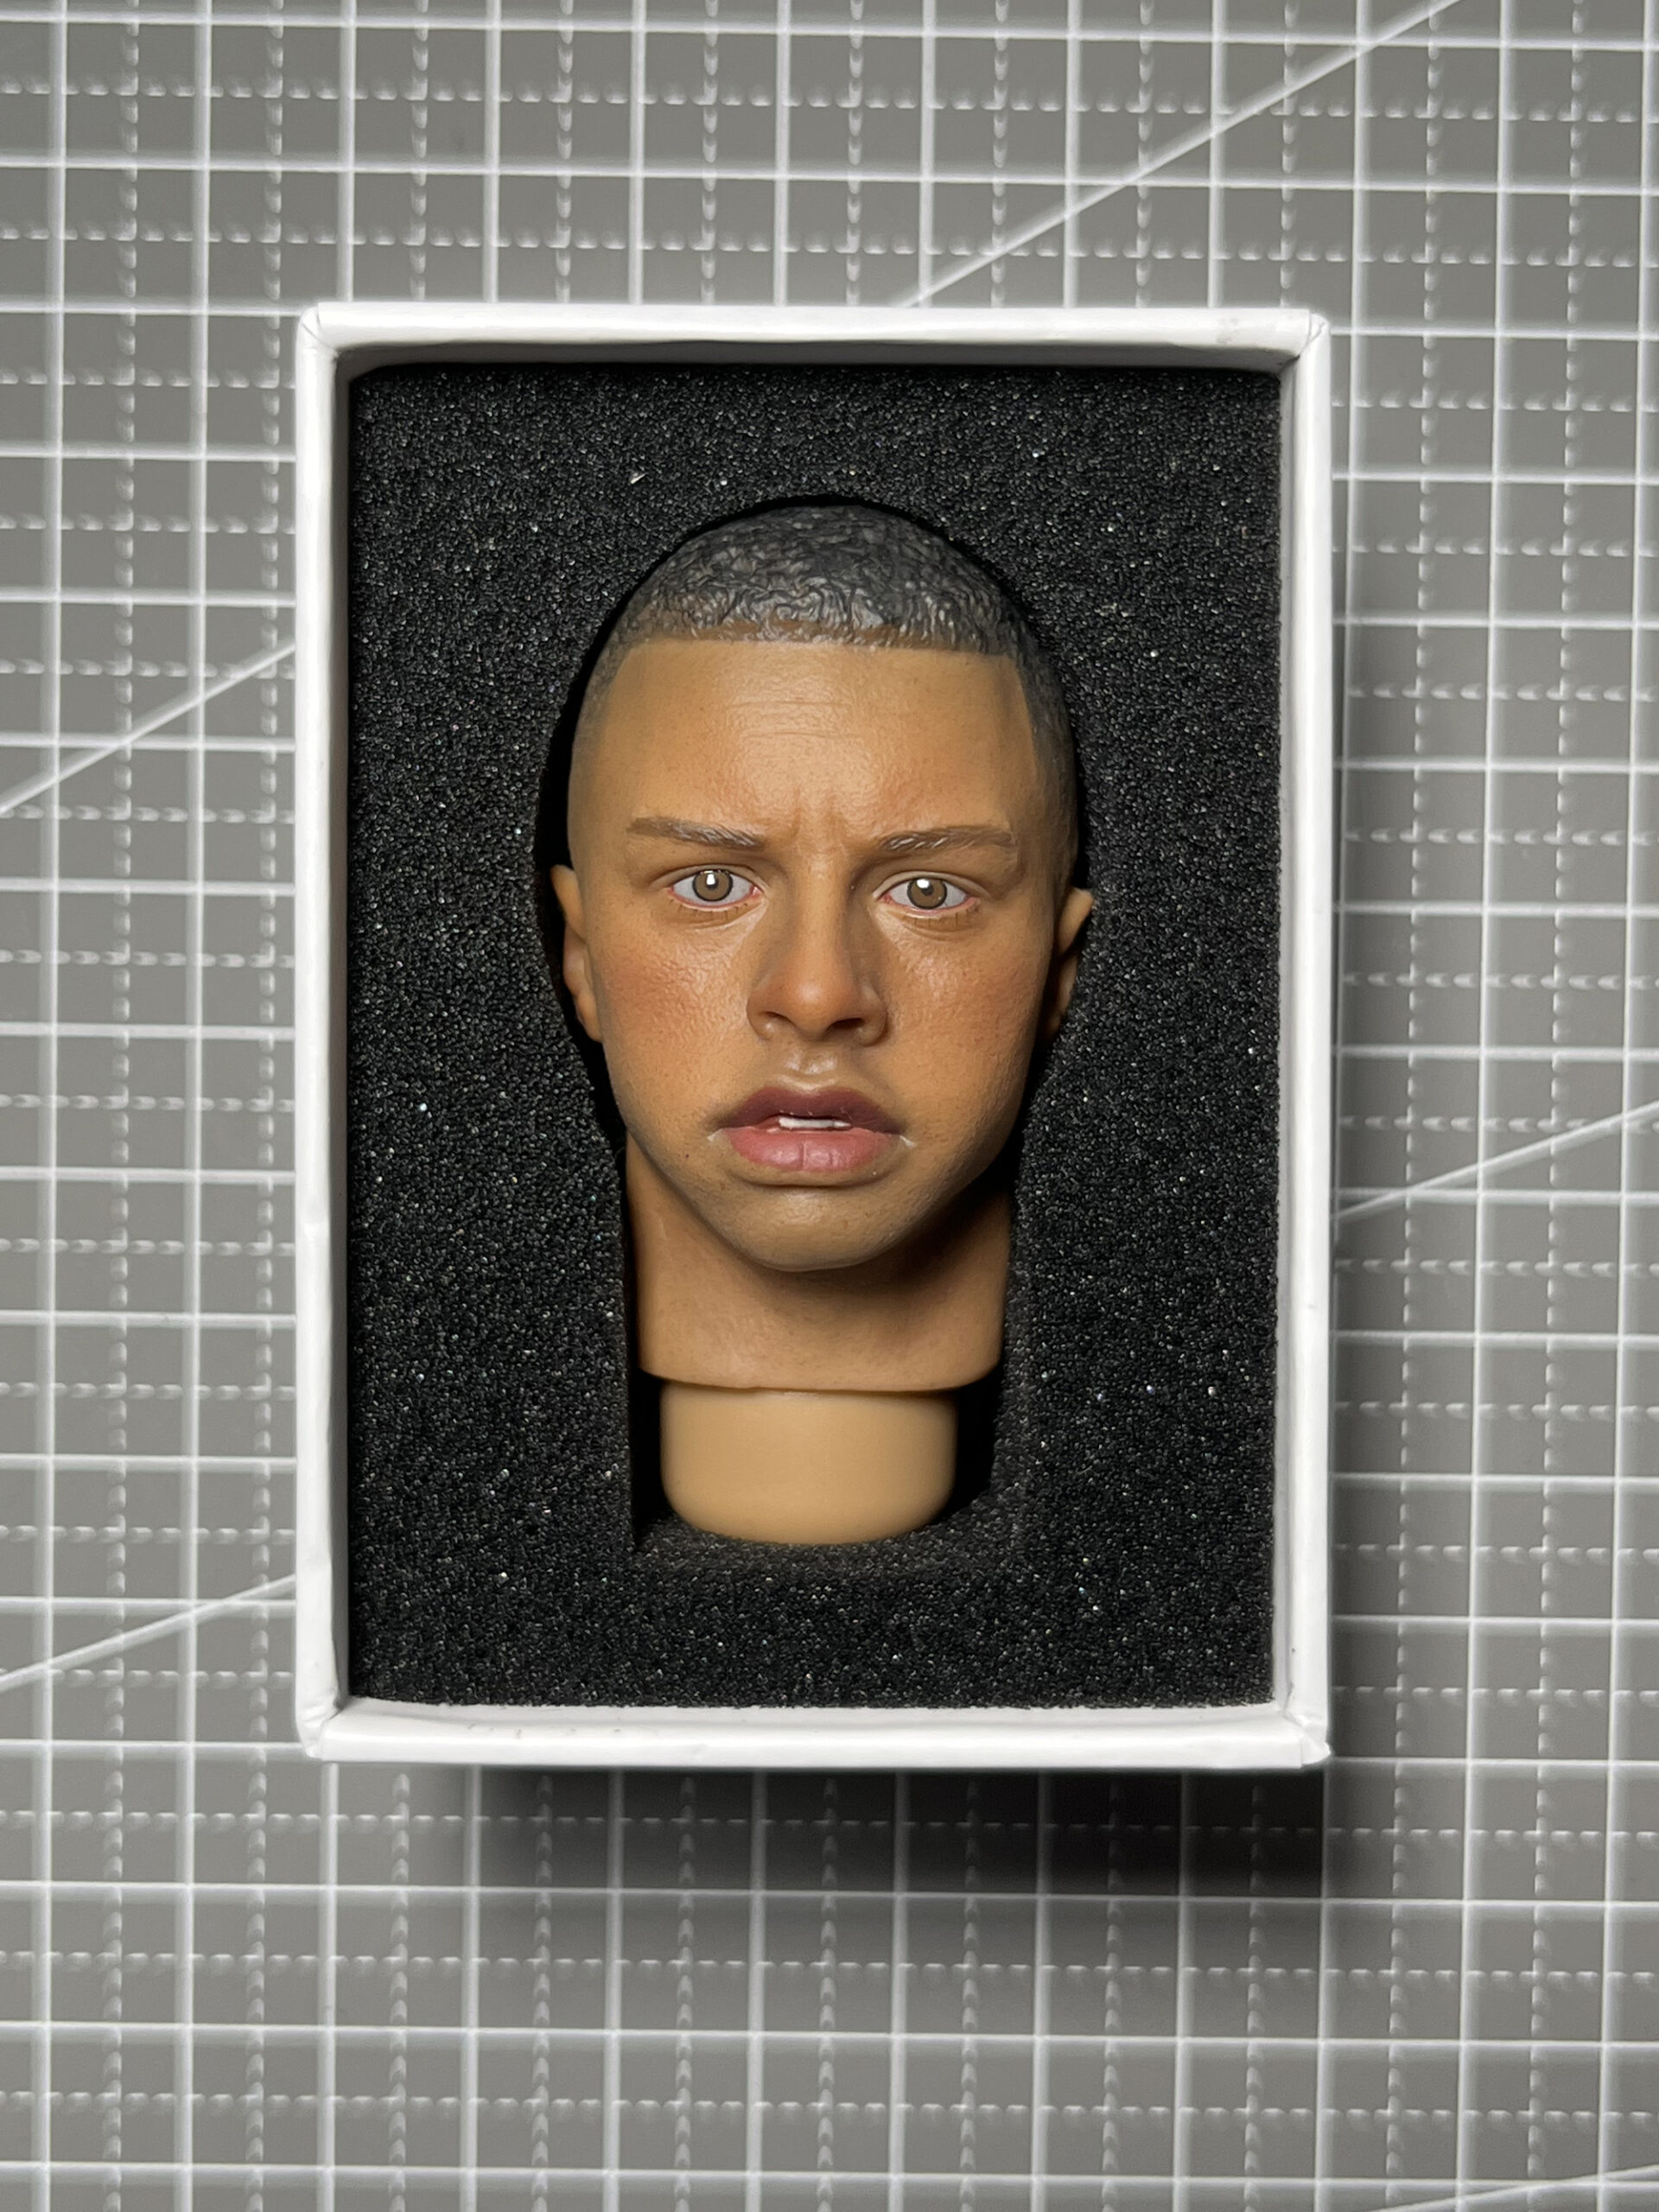 Facepoolfigure Expression with FacepoolFigure FP-S-002 Black Online Store Male – Head Sculpt 1/6